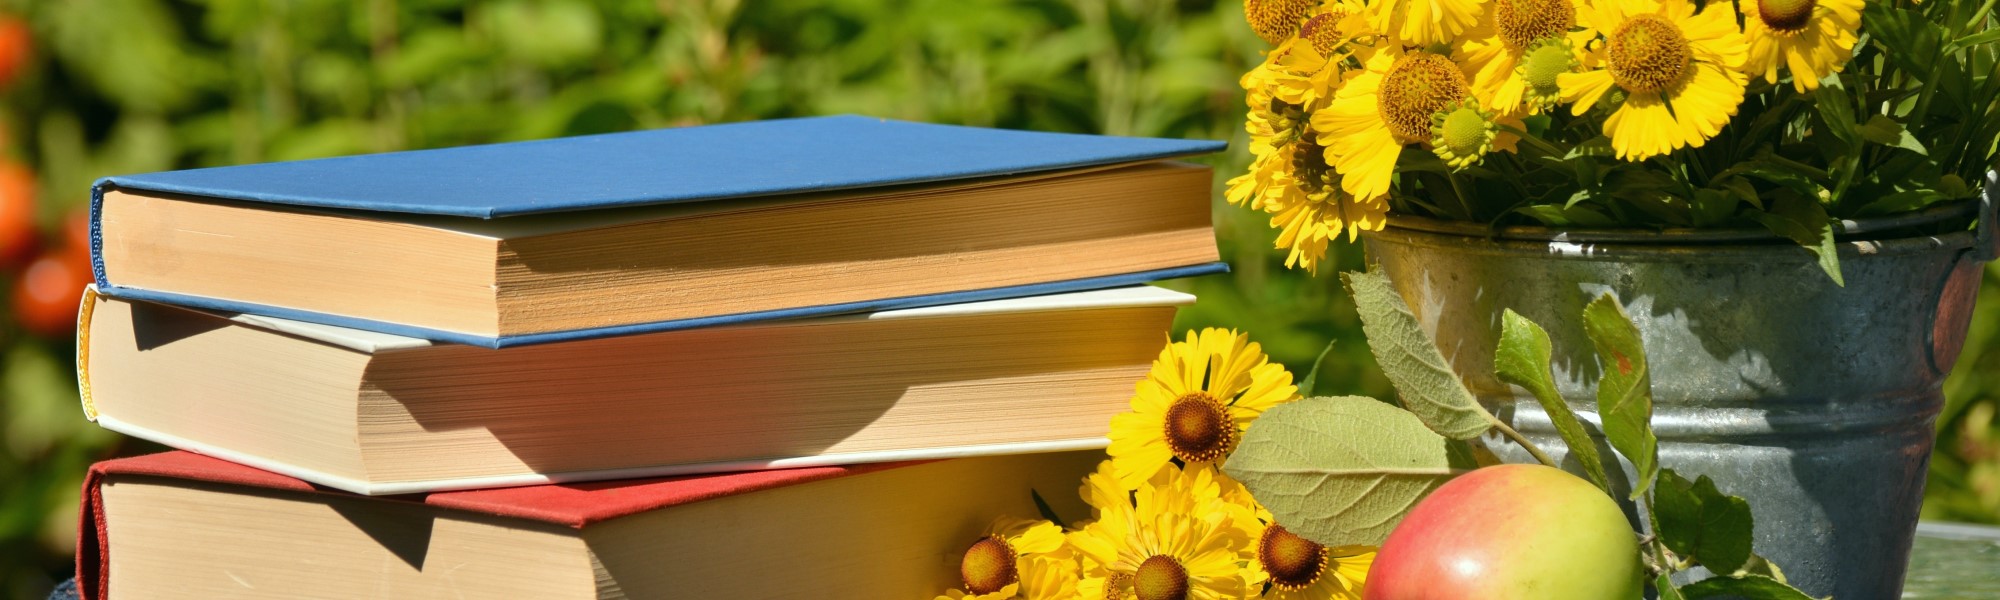 books in grass with flowers